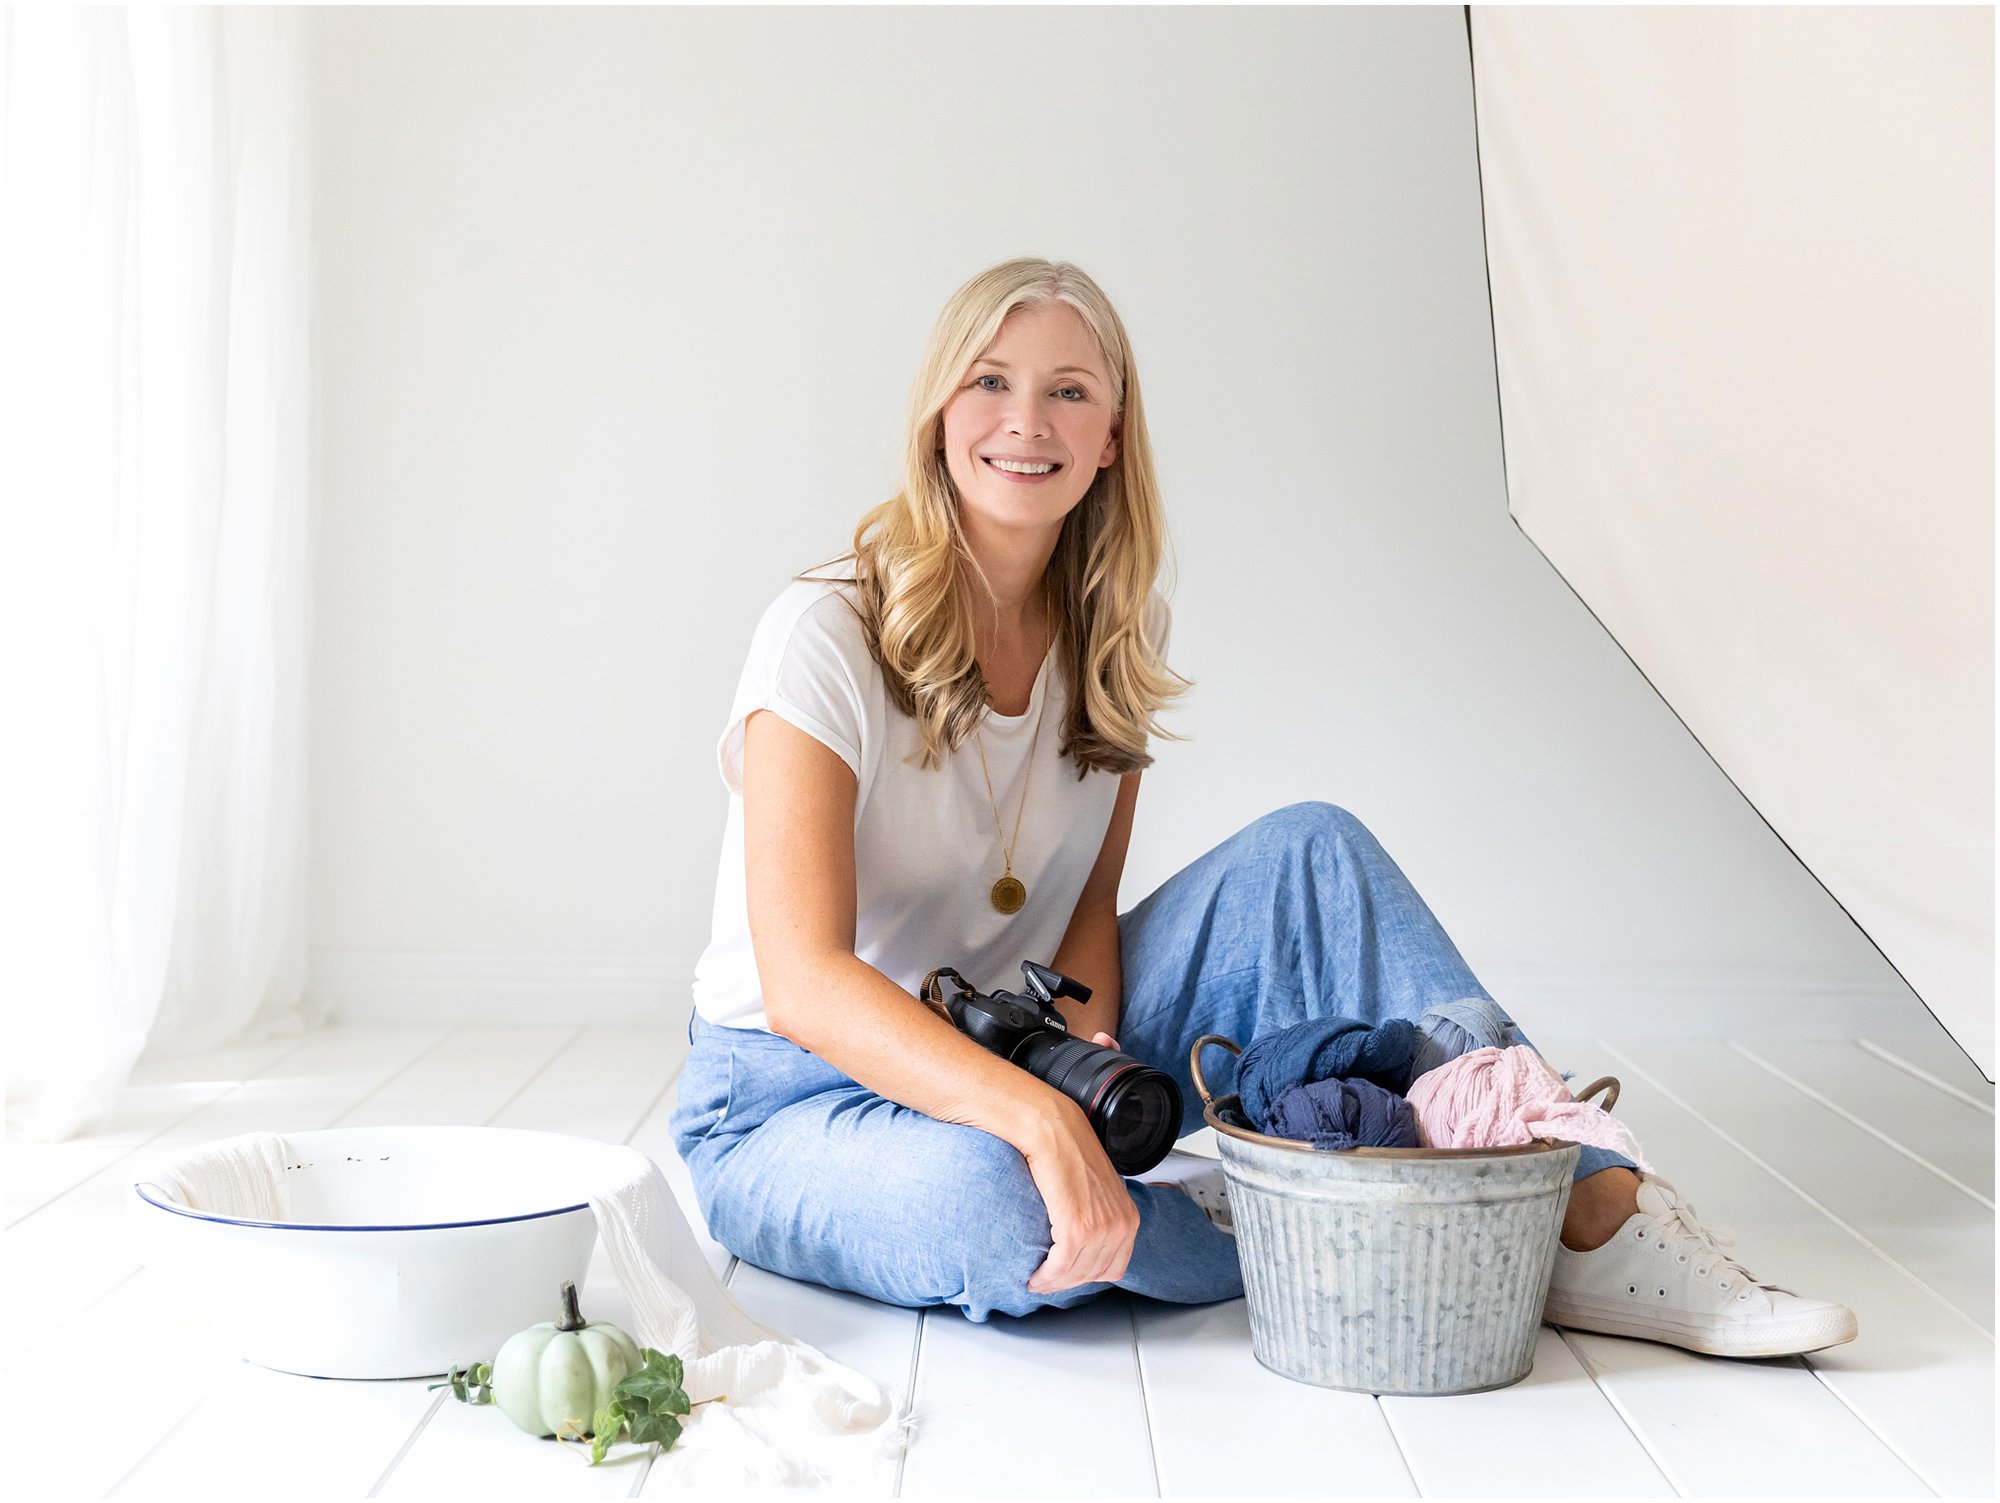 The Photographer Alison McKenny poses in her suffolk studio